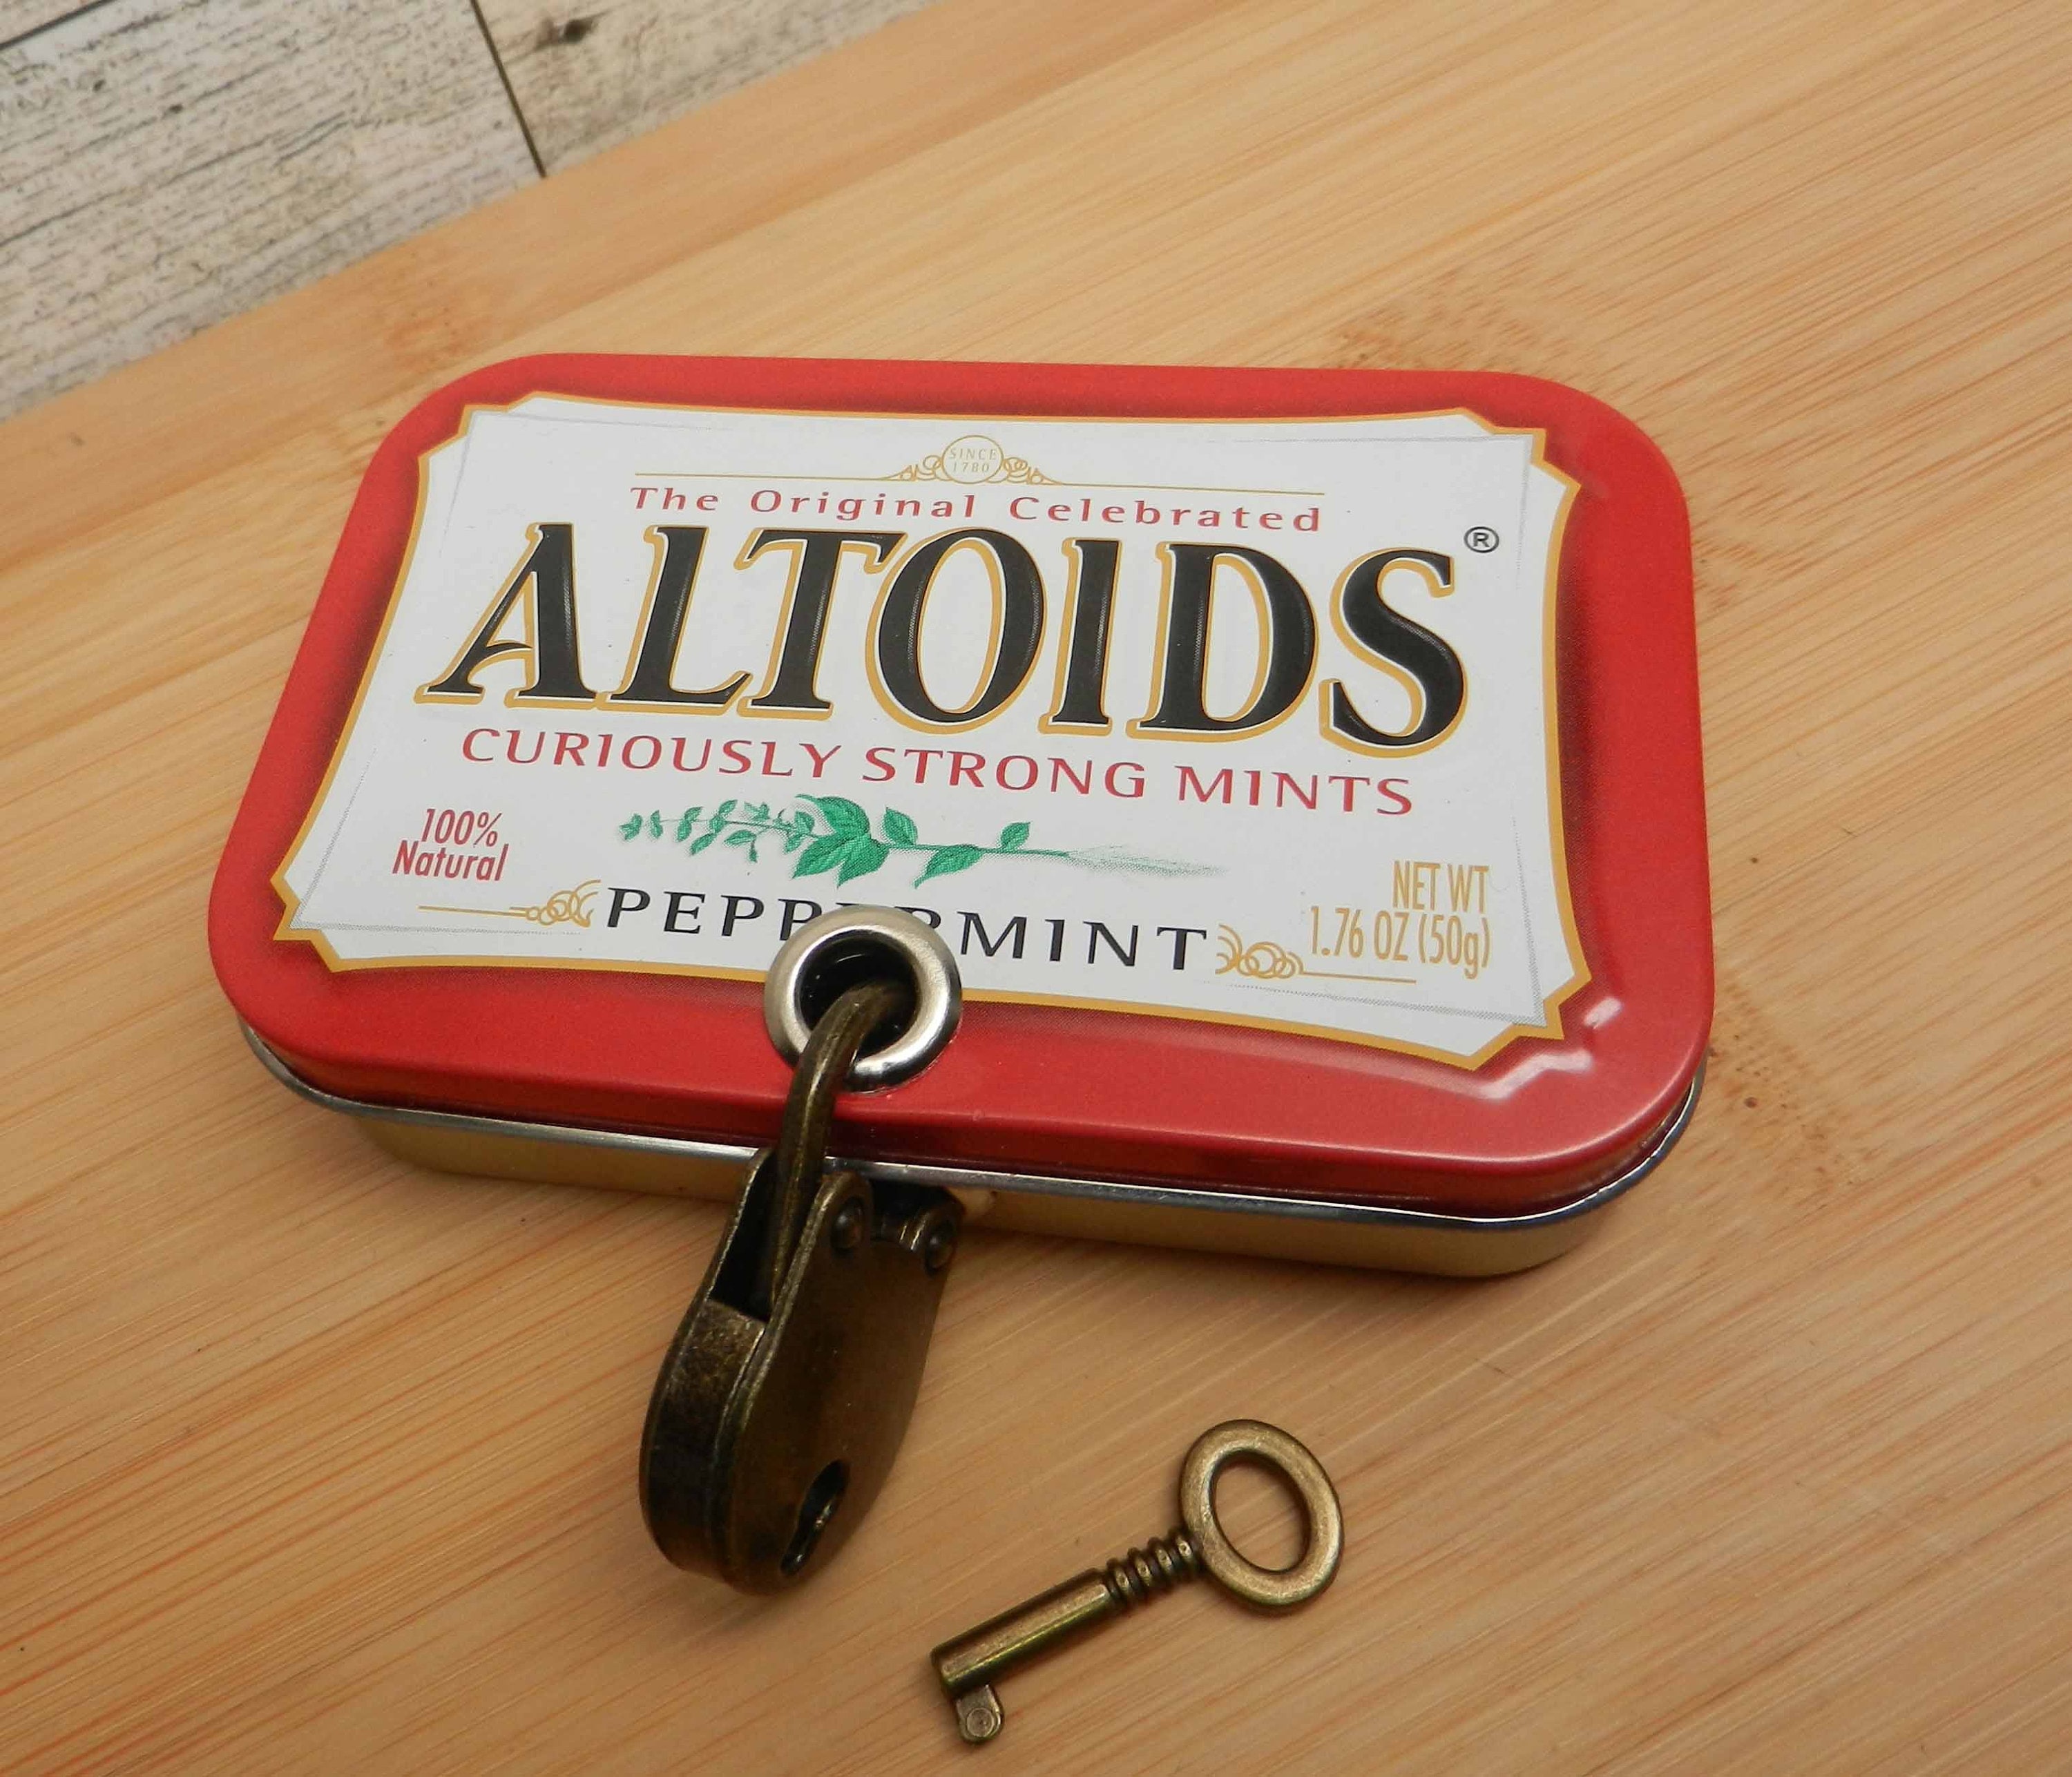 High Quality Blank Altoids Style Tin Use for Making Packaged Gifts